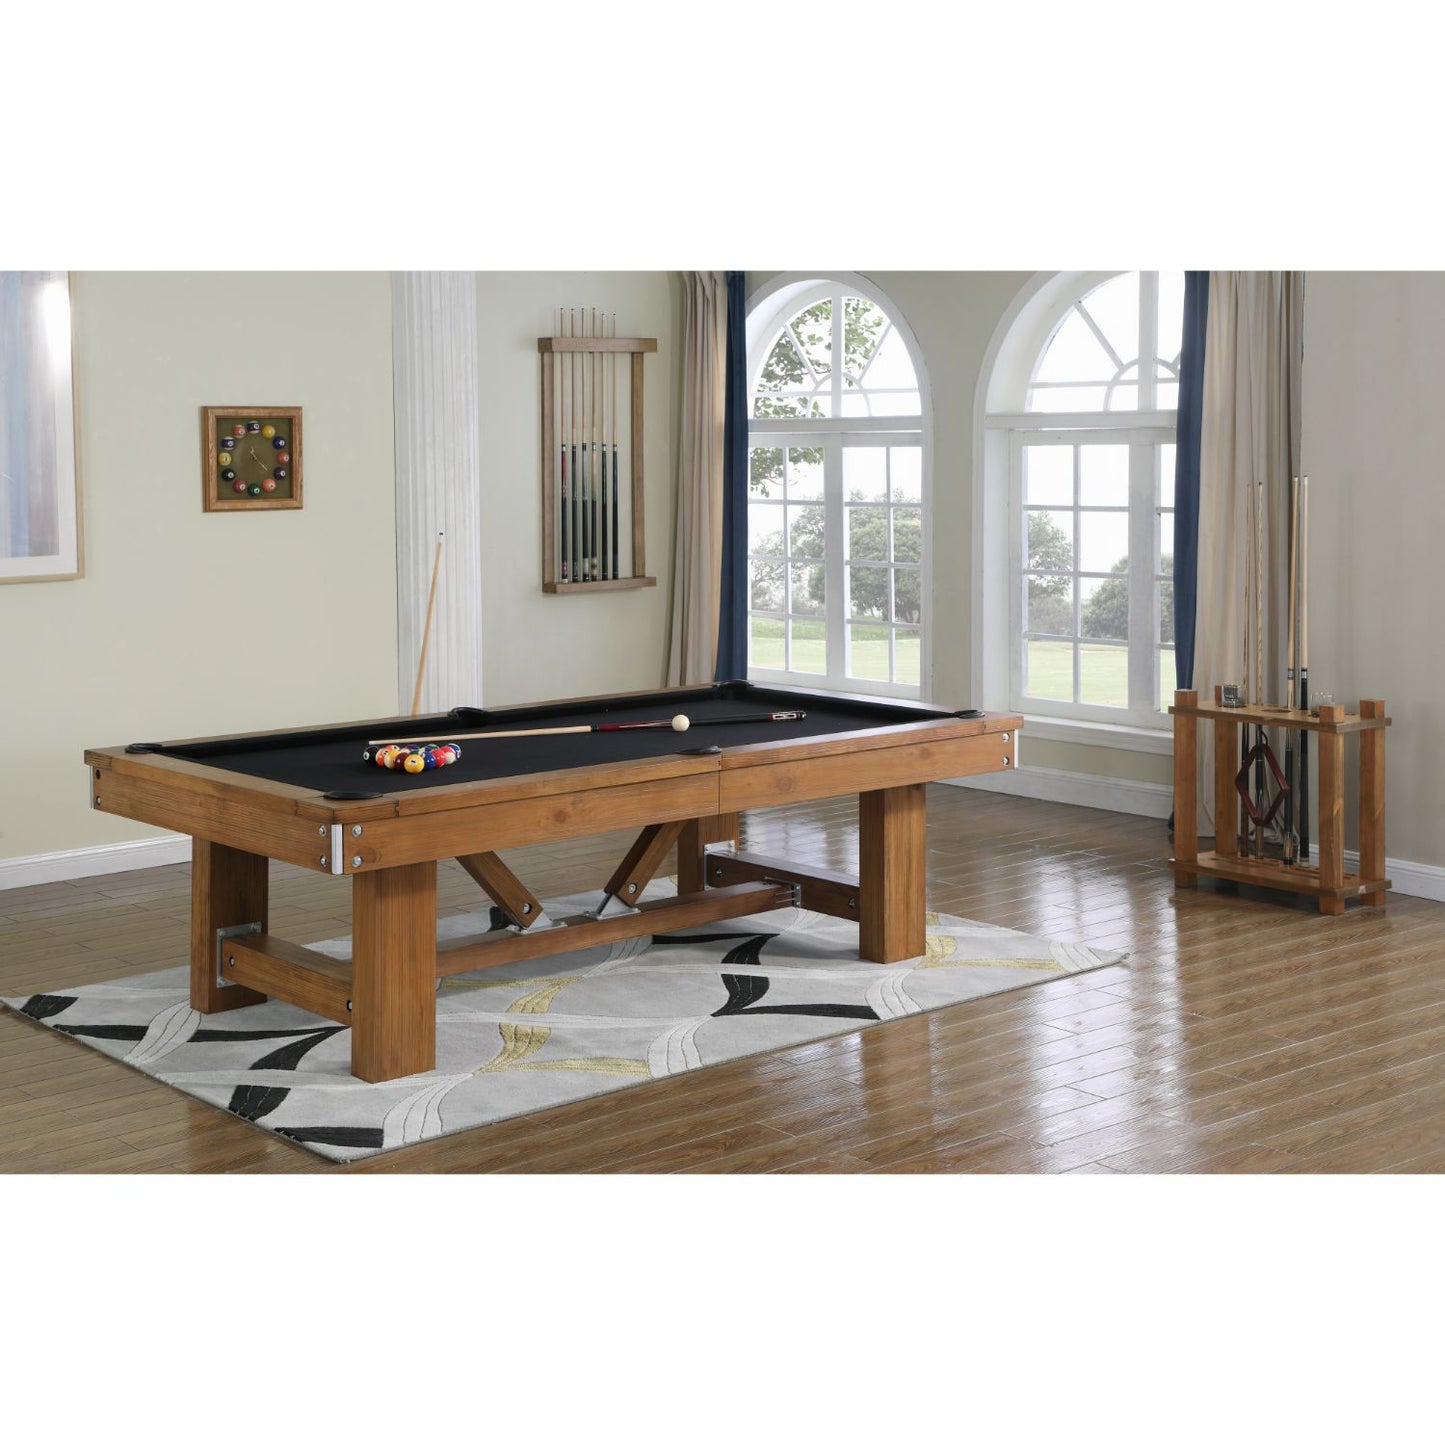 Playcraft Willow Bend Slate Pool Table with Optional Dining Top & Bench - Gaming Blaze